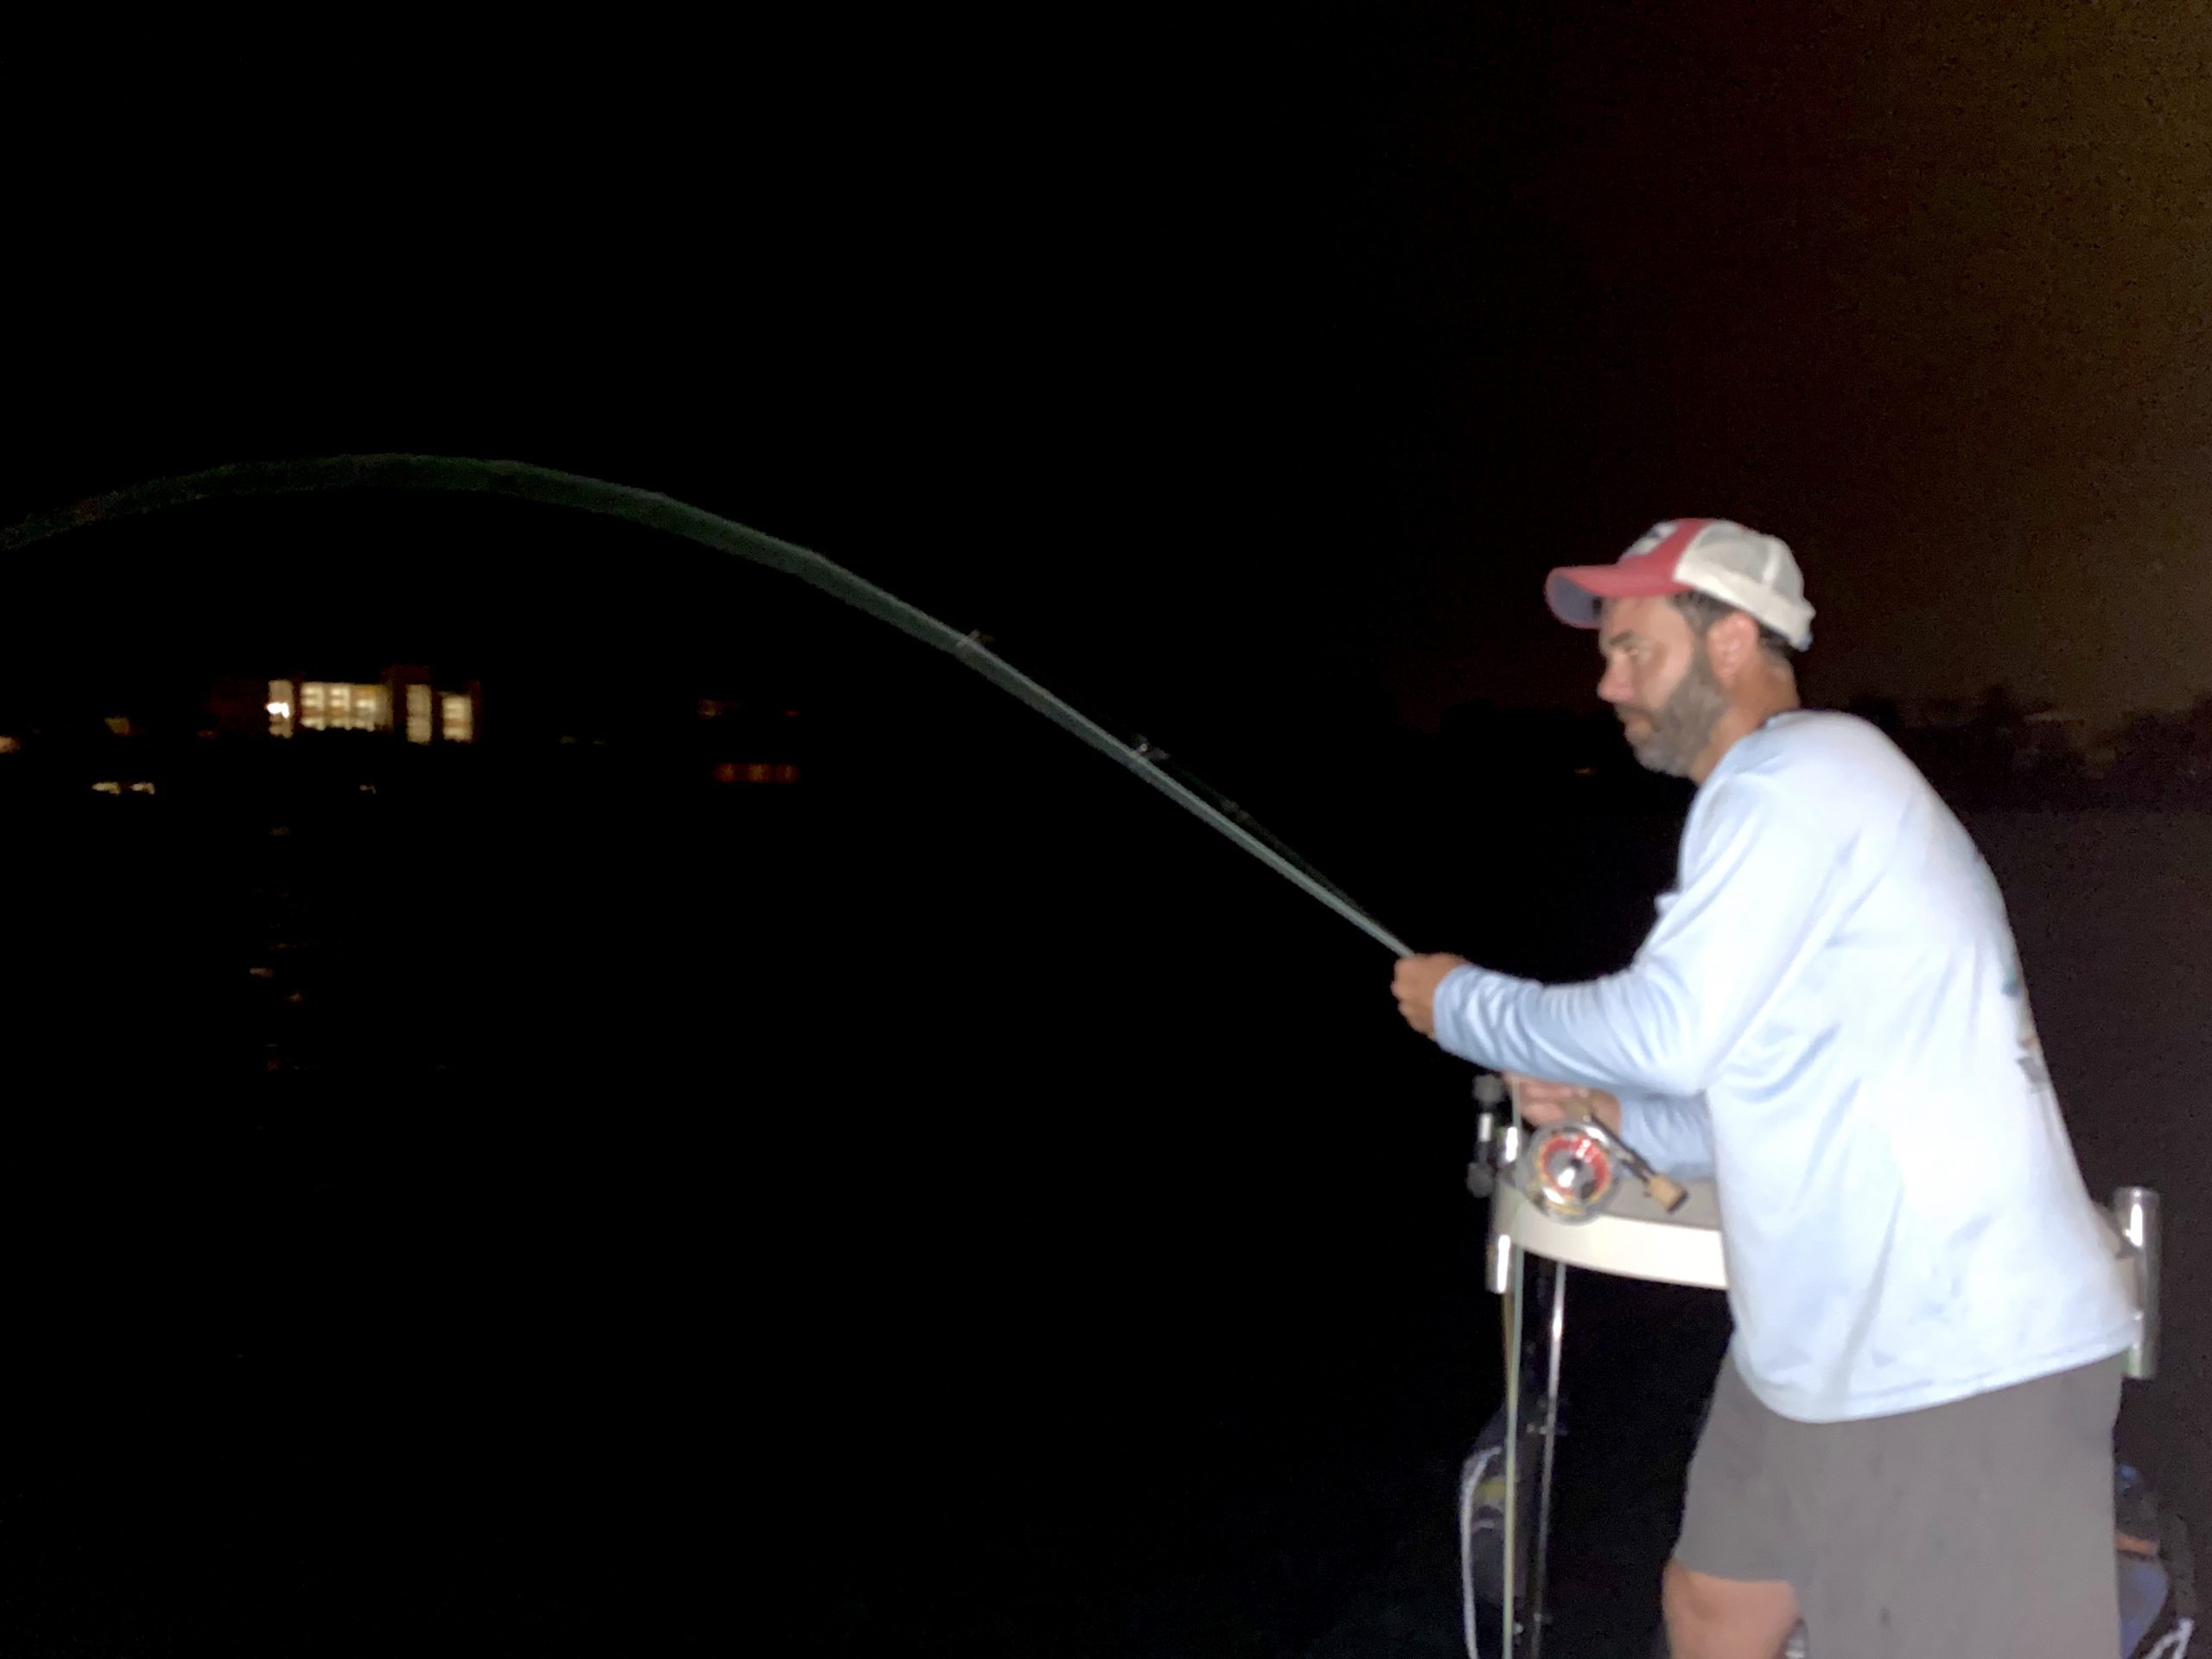 An angler fights a snook at night